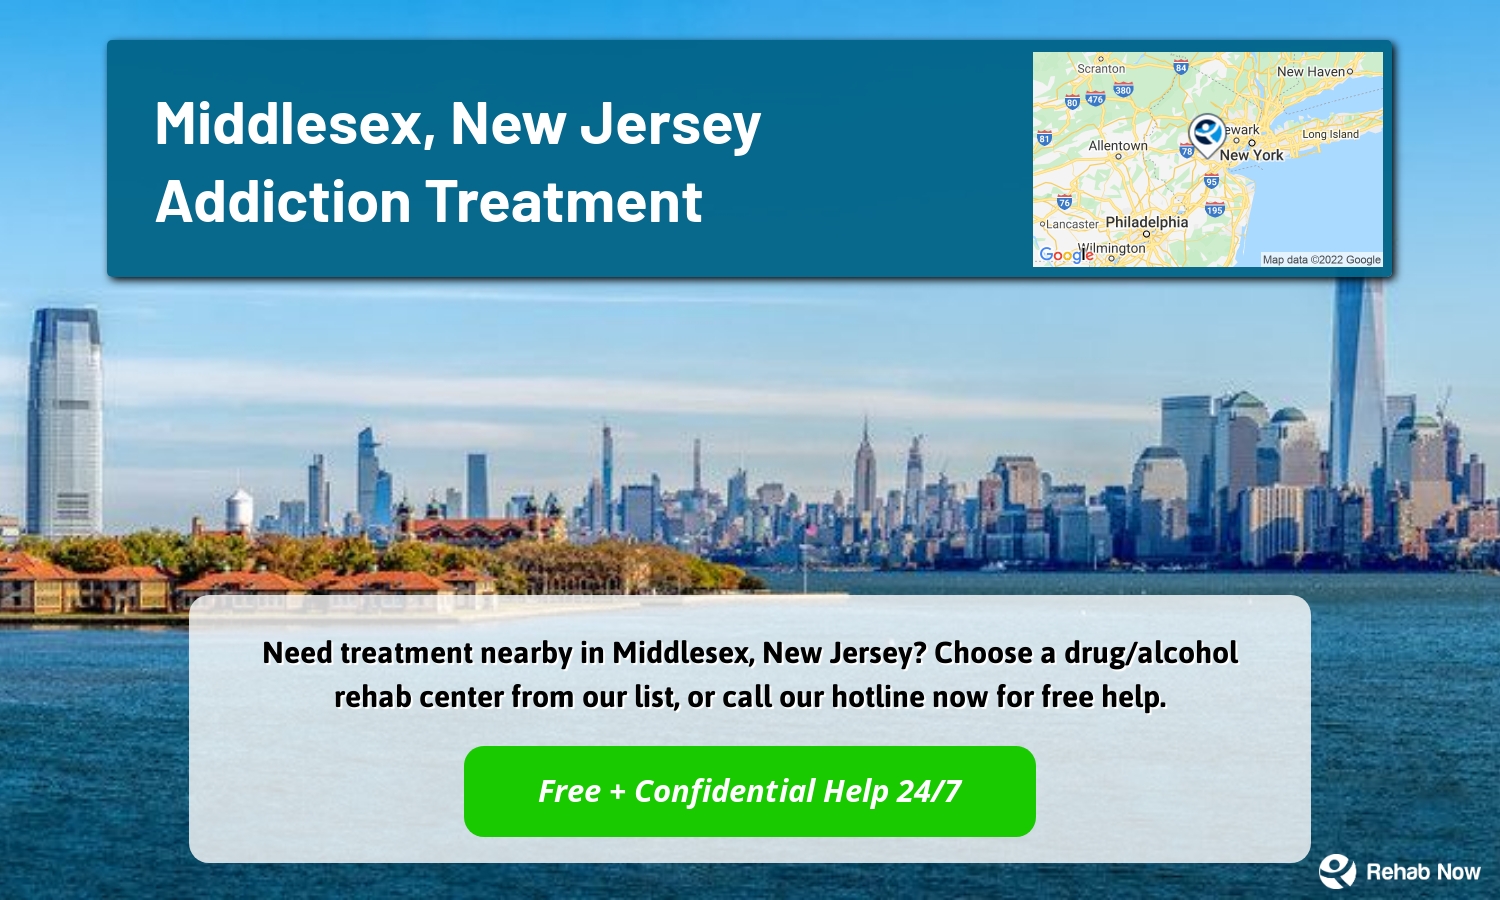 Need treatment nearby in Middlesex, New Jersey? Choose a drug/alcohol rehab center from our list, or call our hotline now for free help.